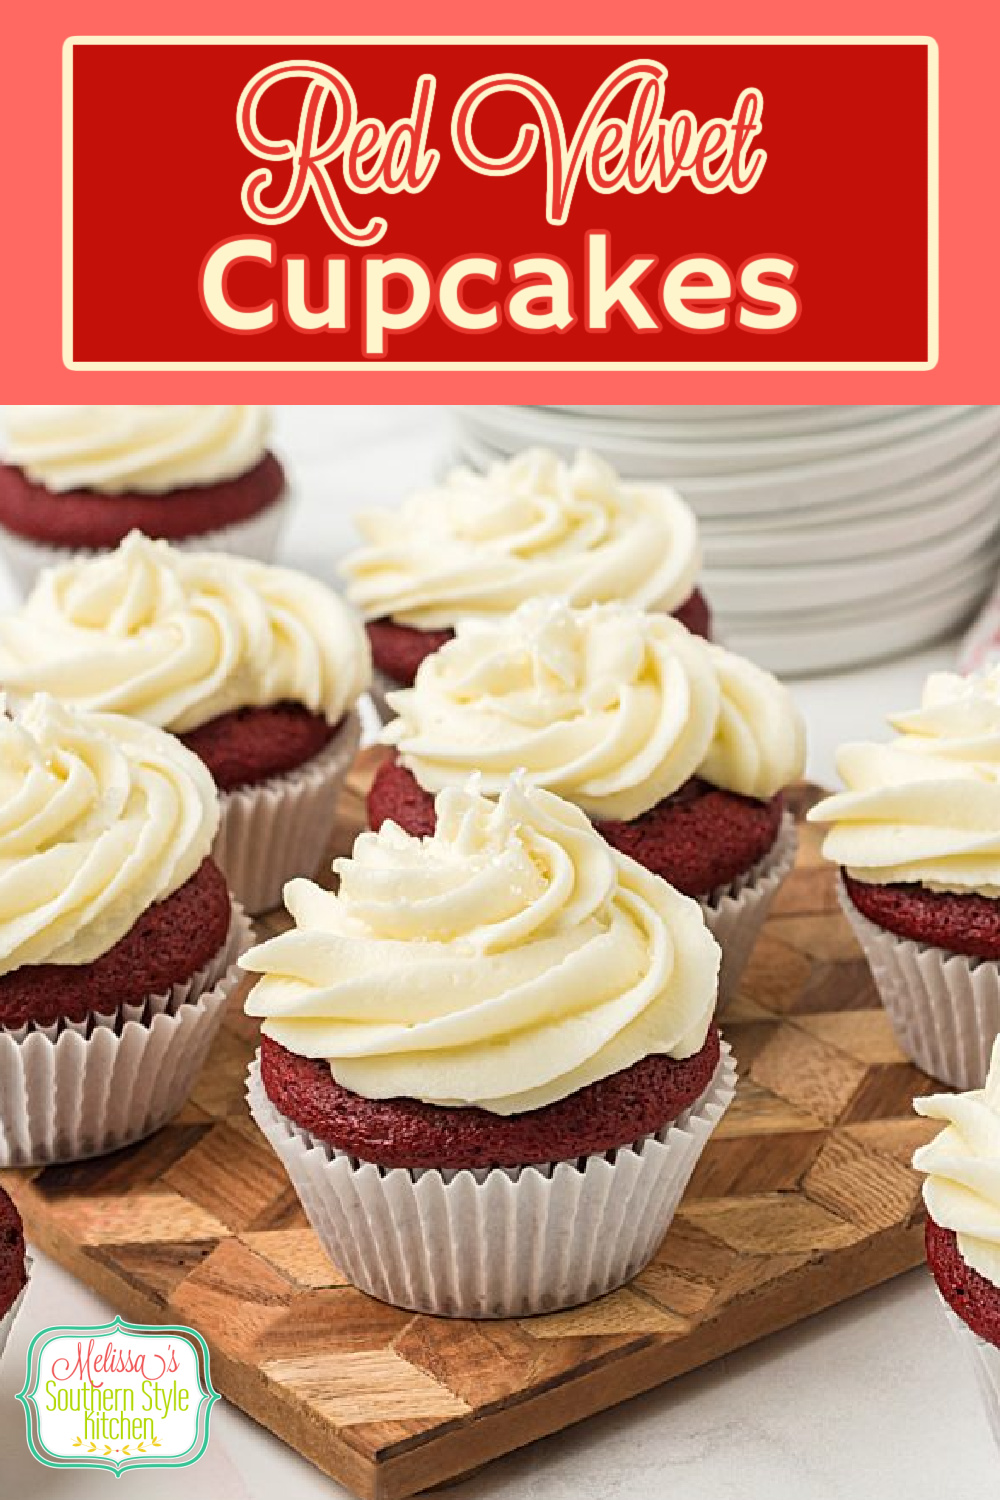 These scratch made Red Velvet Cupcakes are a supreme choice for birthday celebrations, casual family gatherings and holiday parties #redvelvet #cupcakes #redvelvetcupcakes #cupcakerecipes #southernredvelvet #chocolatecake #chocolatecupcakes via @melissasssk